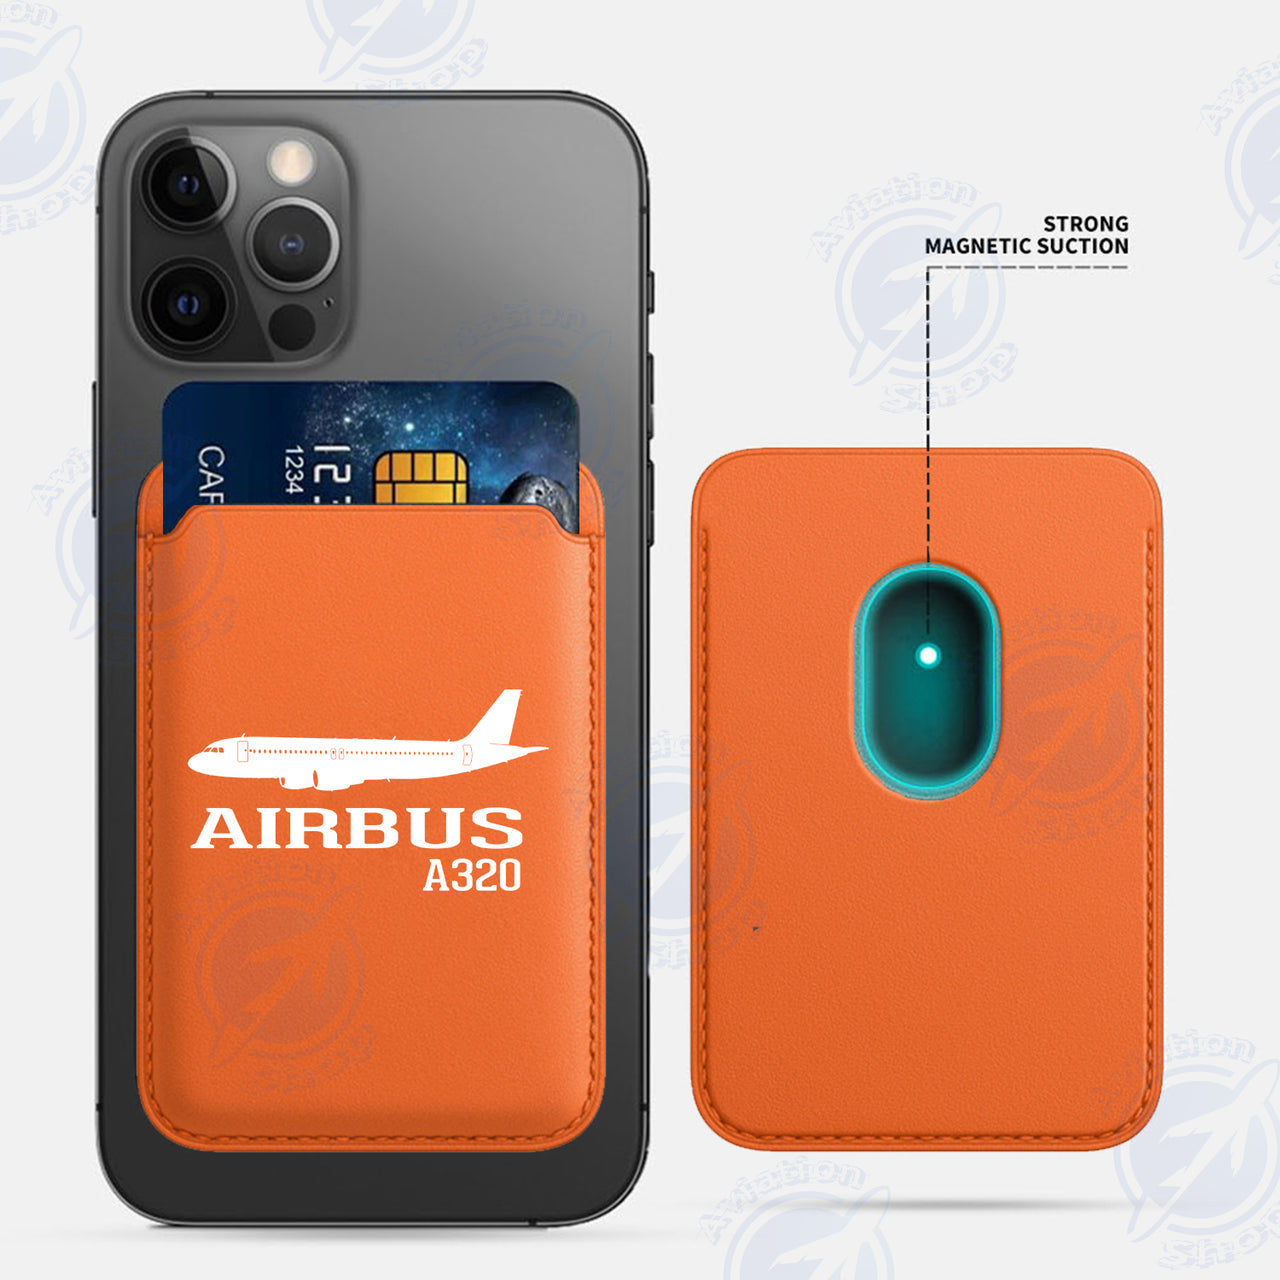 Airbus A320 Printed iPhone Cases Magnetic Card Wallet